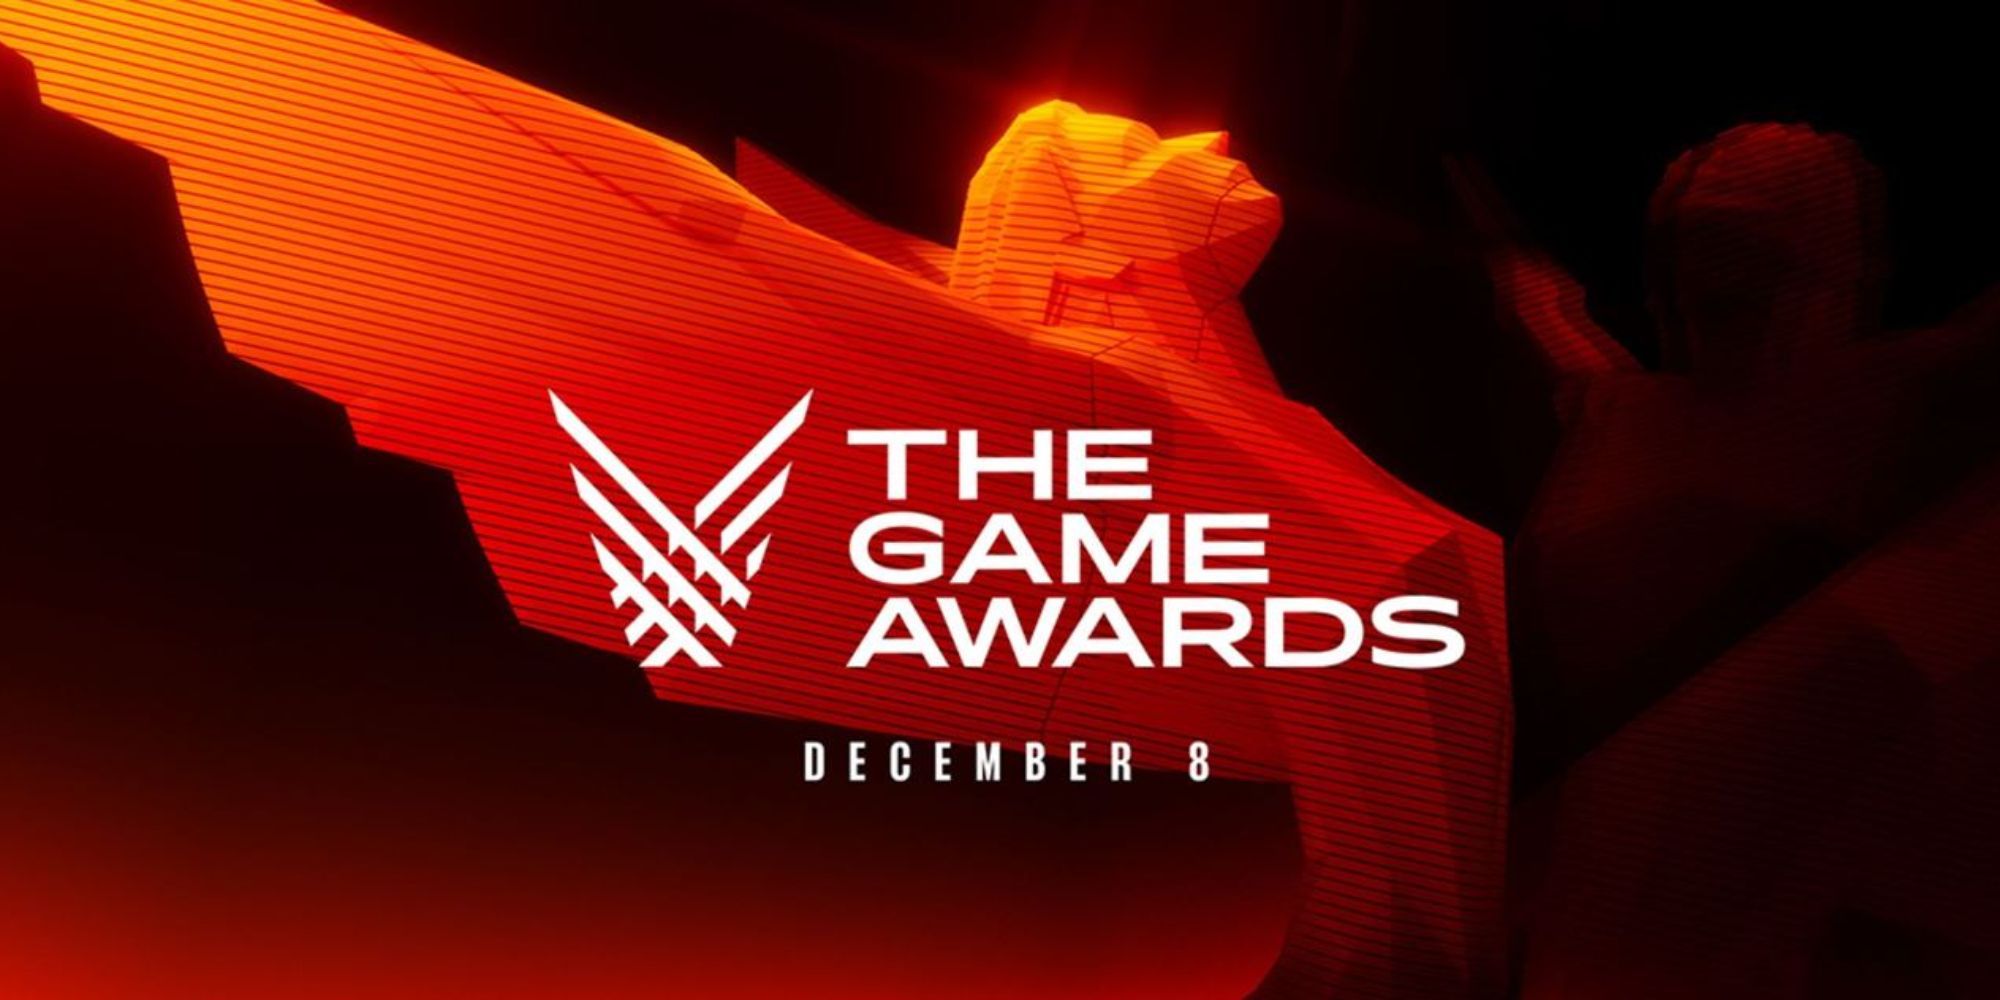 Here are the nominees for GAME OF THE YEAR 2022 #TheGameAwards #nomina